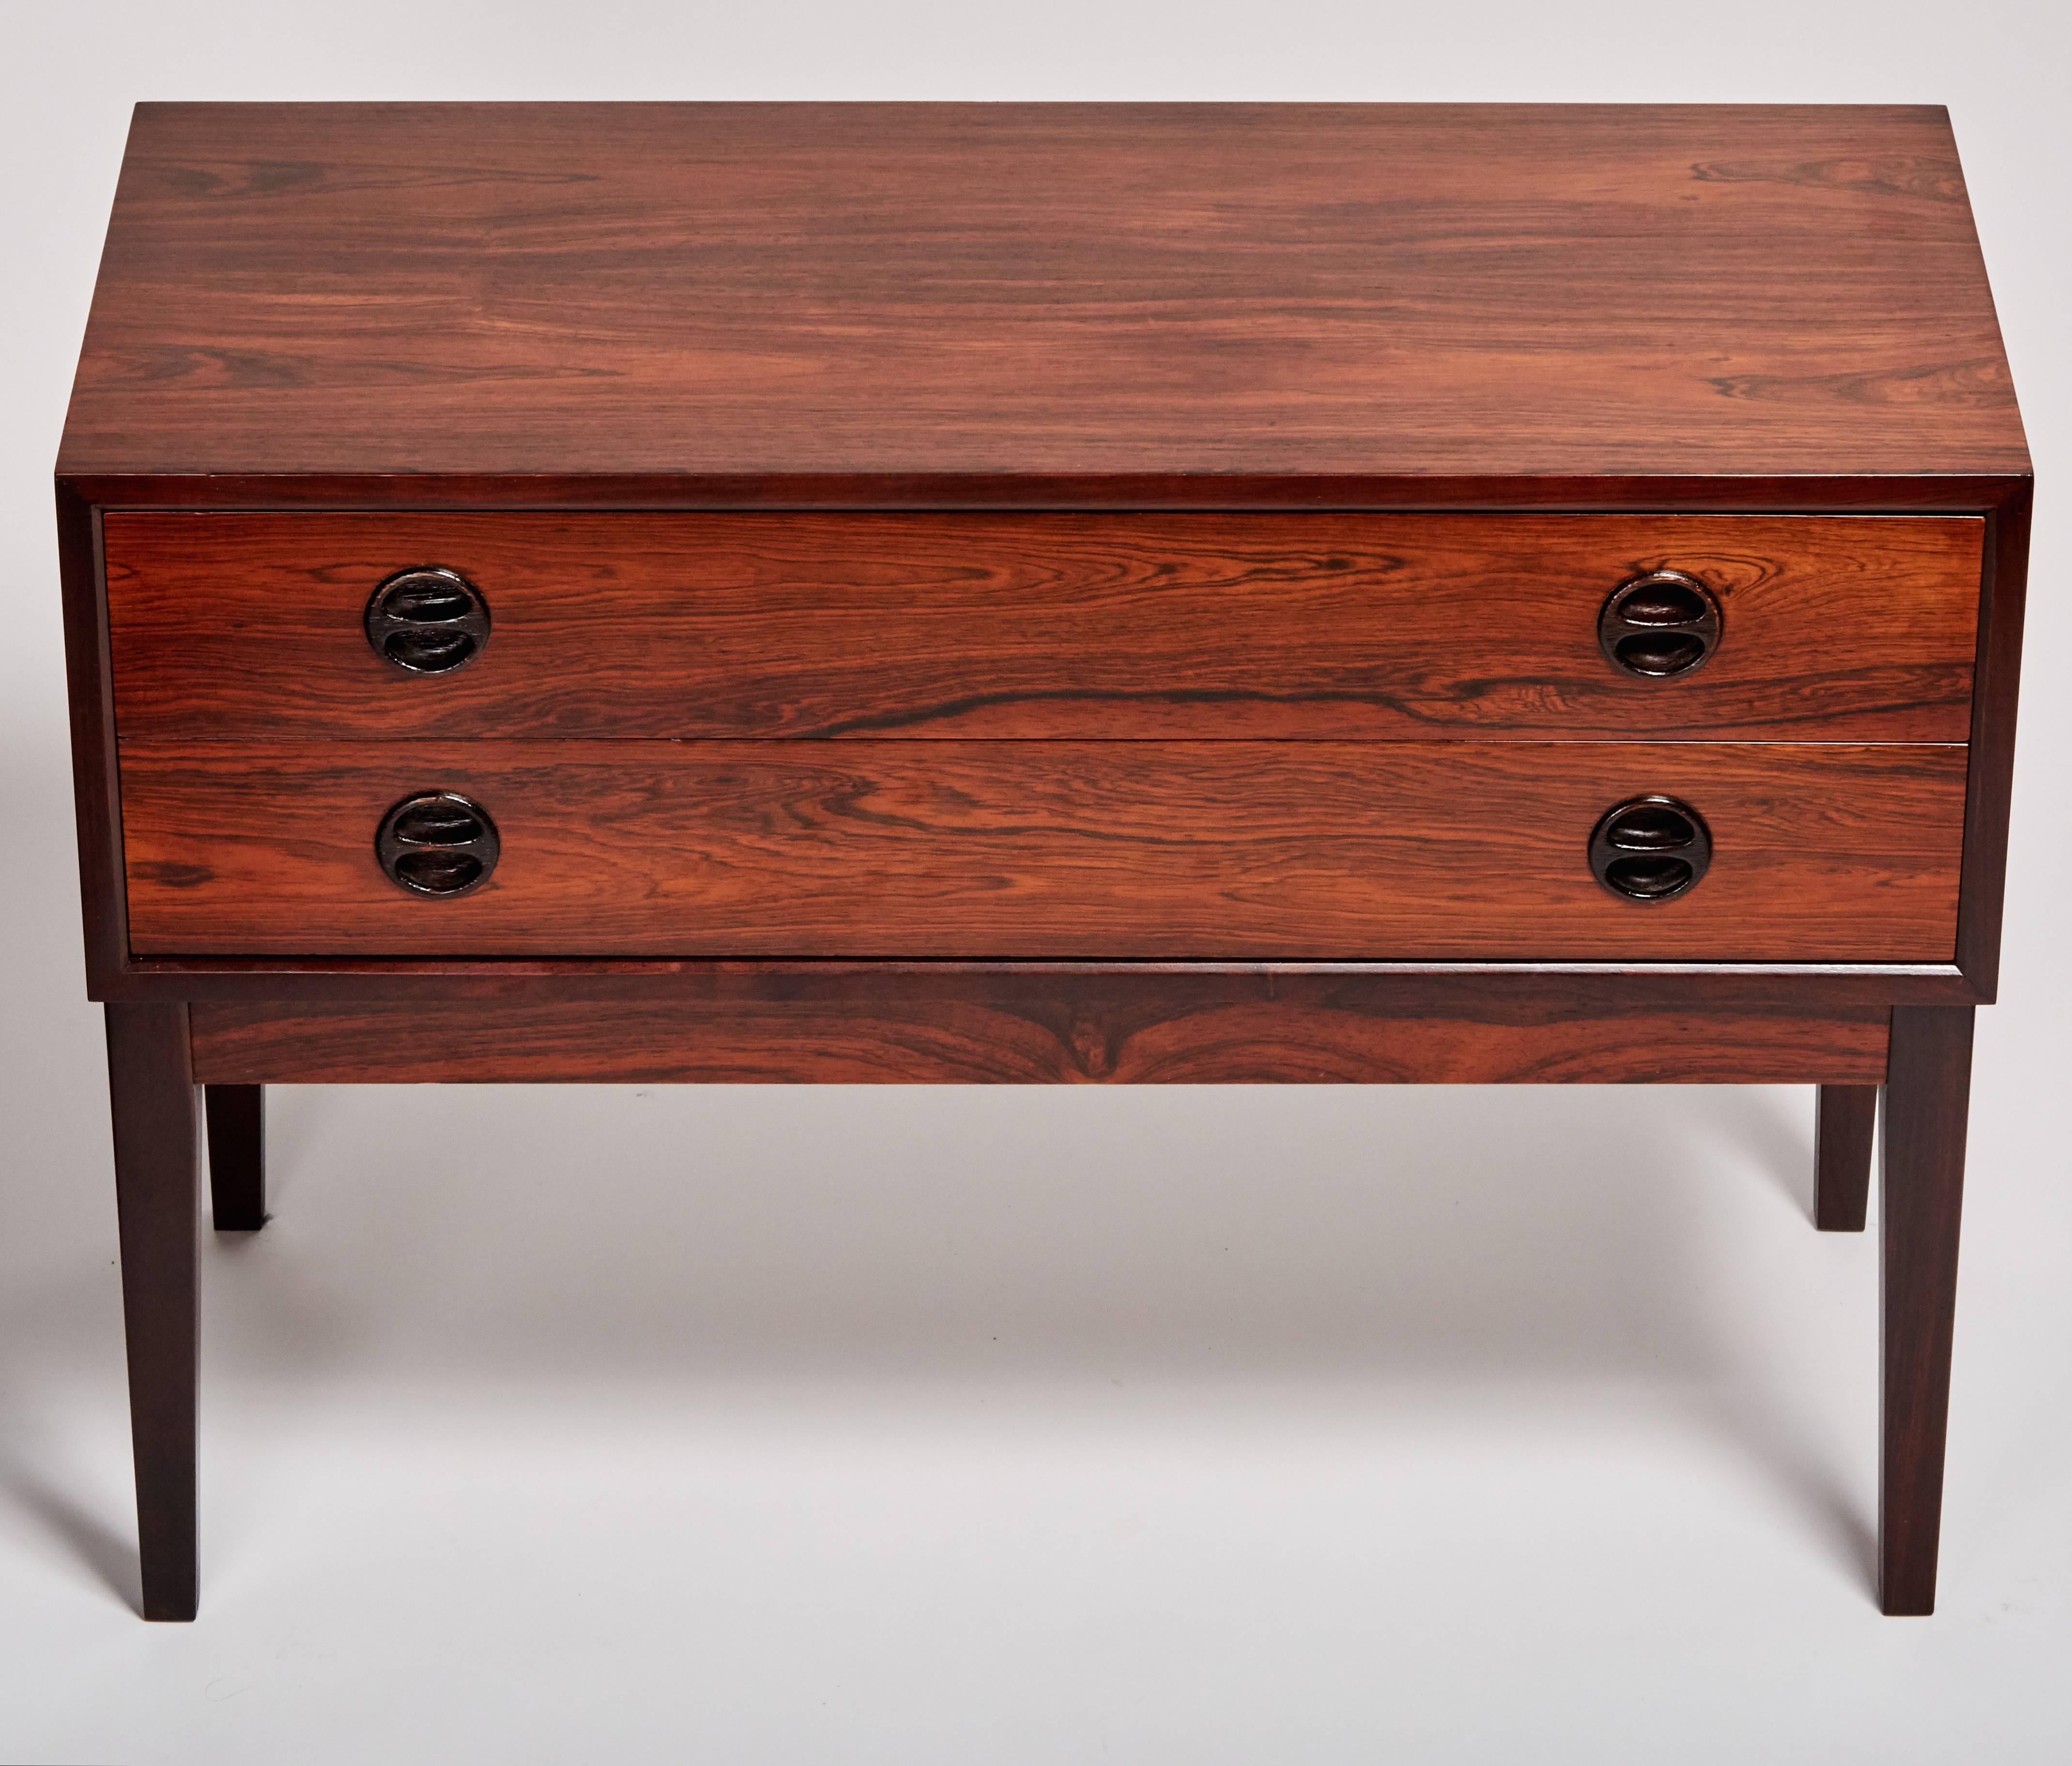 Petite, Danish modern, two-drawer, rosewood dresser with recessed pulls is also perfect as a low entryway console.